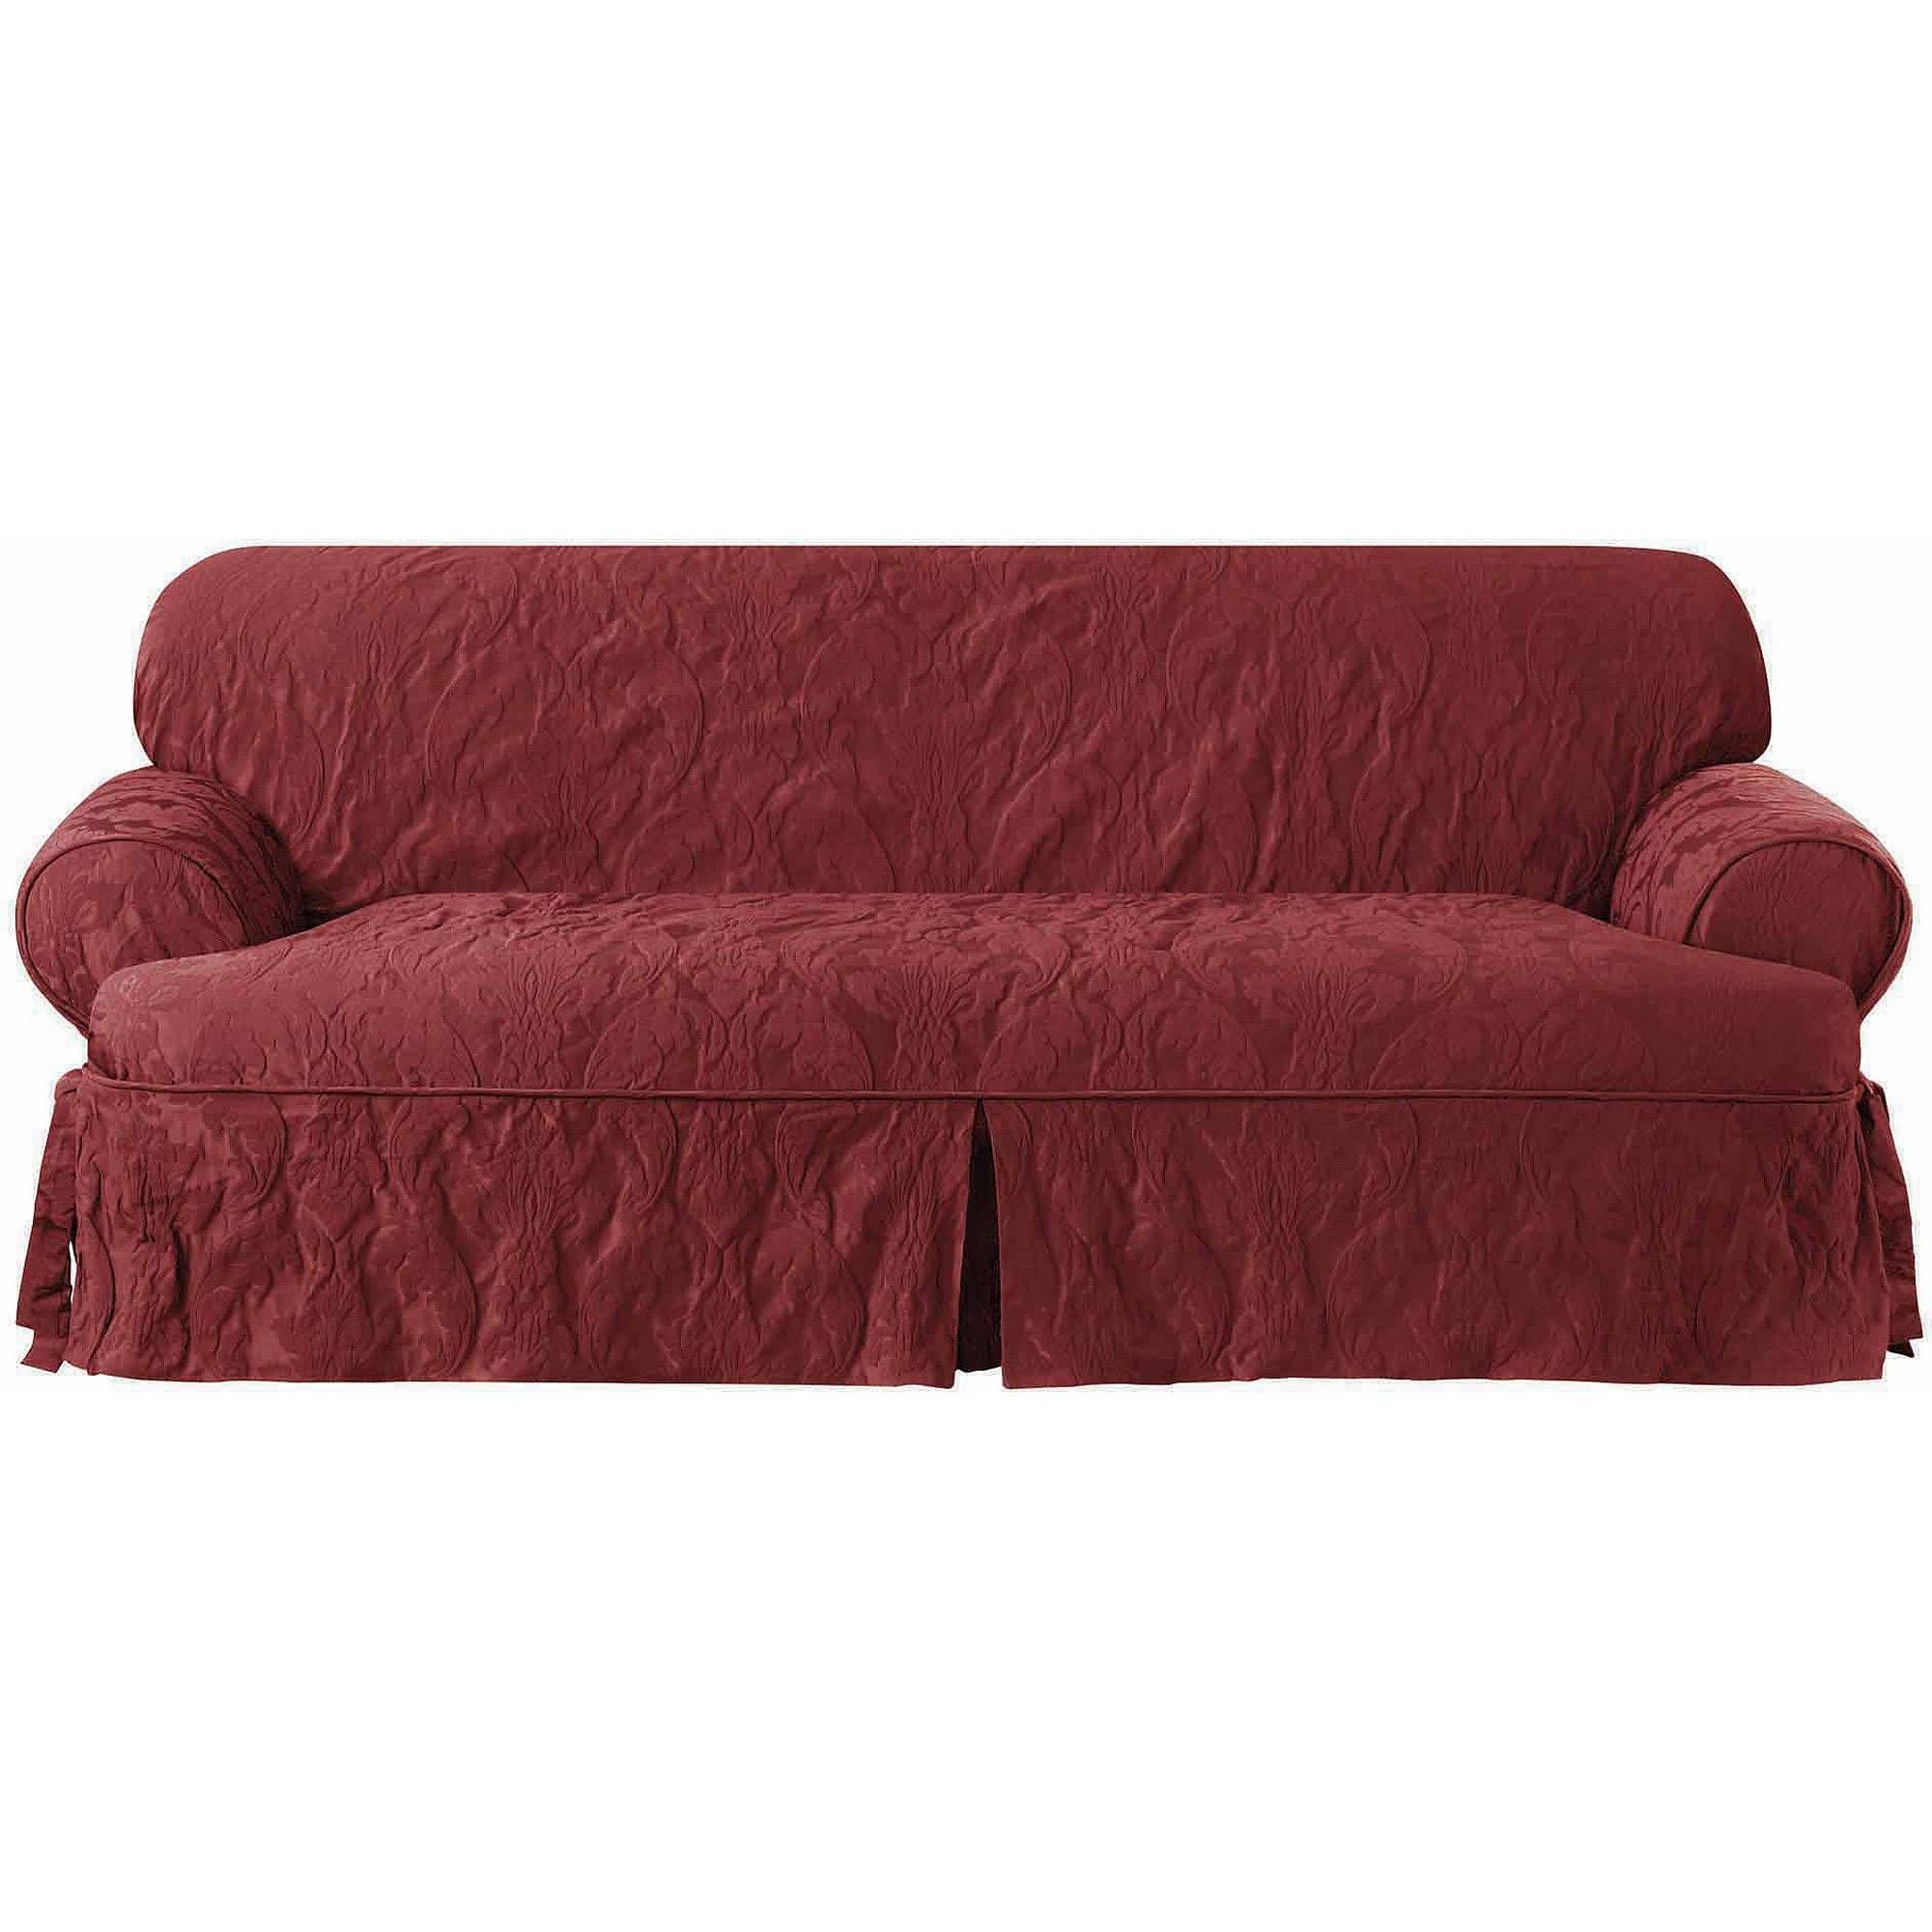 Sure Fit Sofa Slipcovers With Regard To T Cushion Slipcovers For Large Sofas (View 5 of 15)